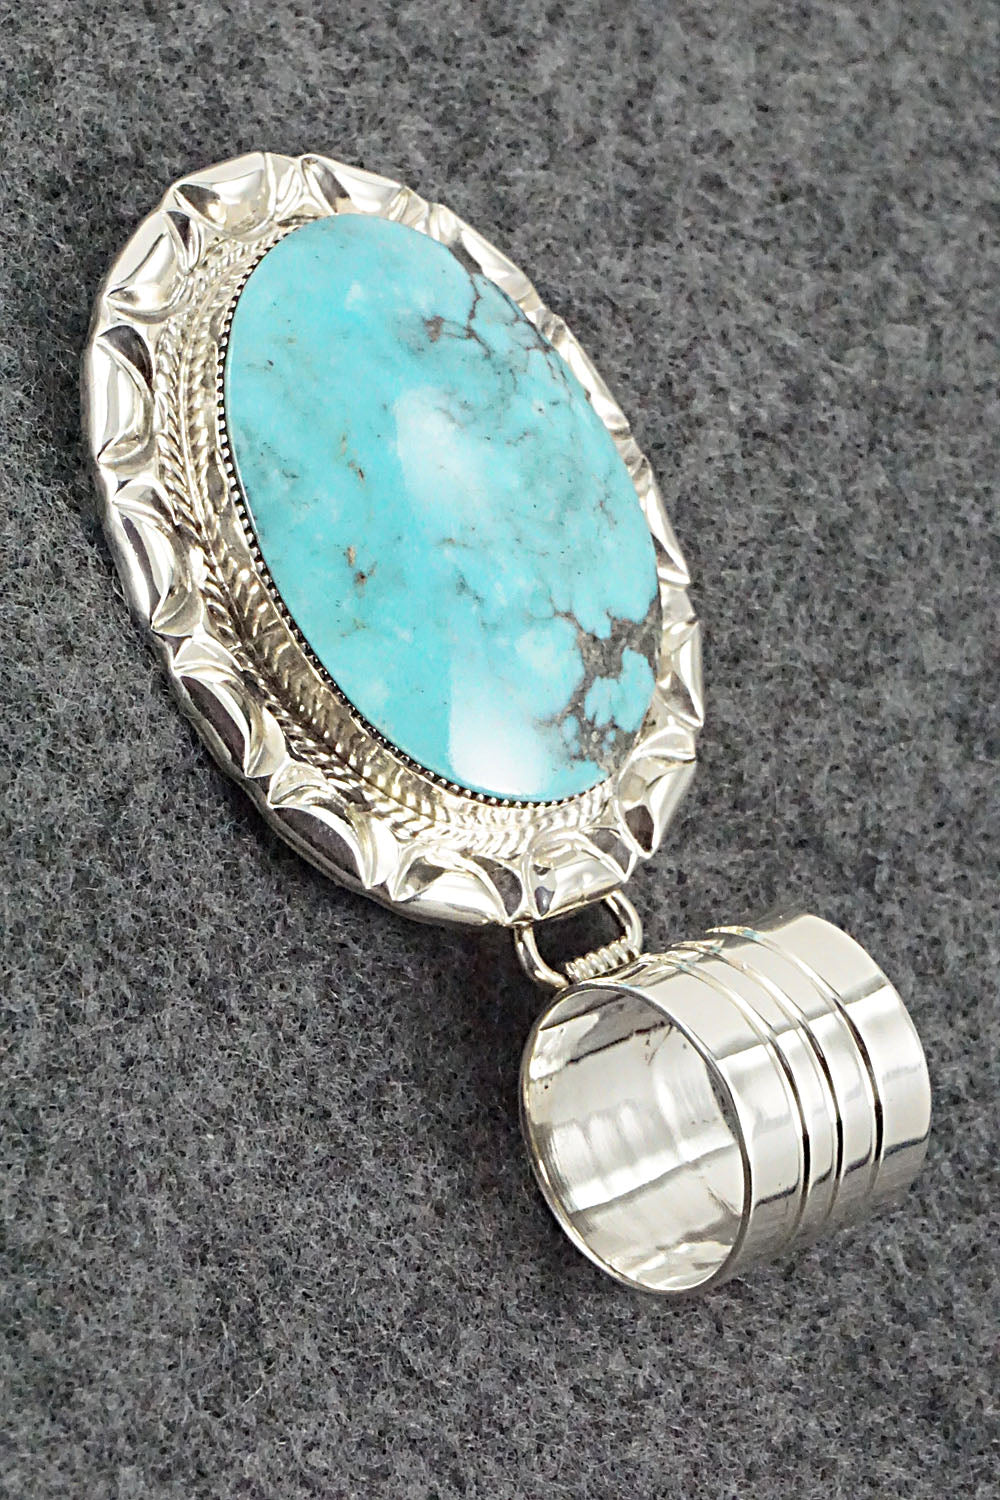 Turquoise & Sterling Silver Pendant - Gregg Yazzie